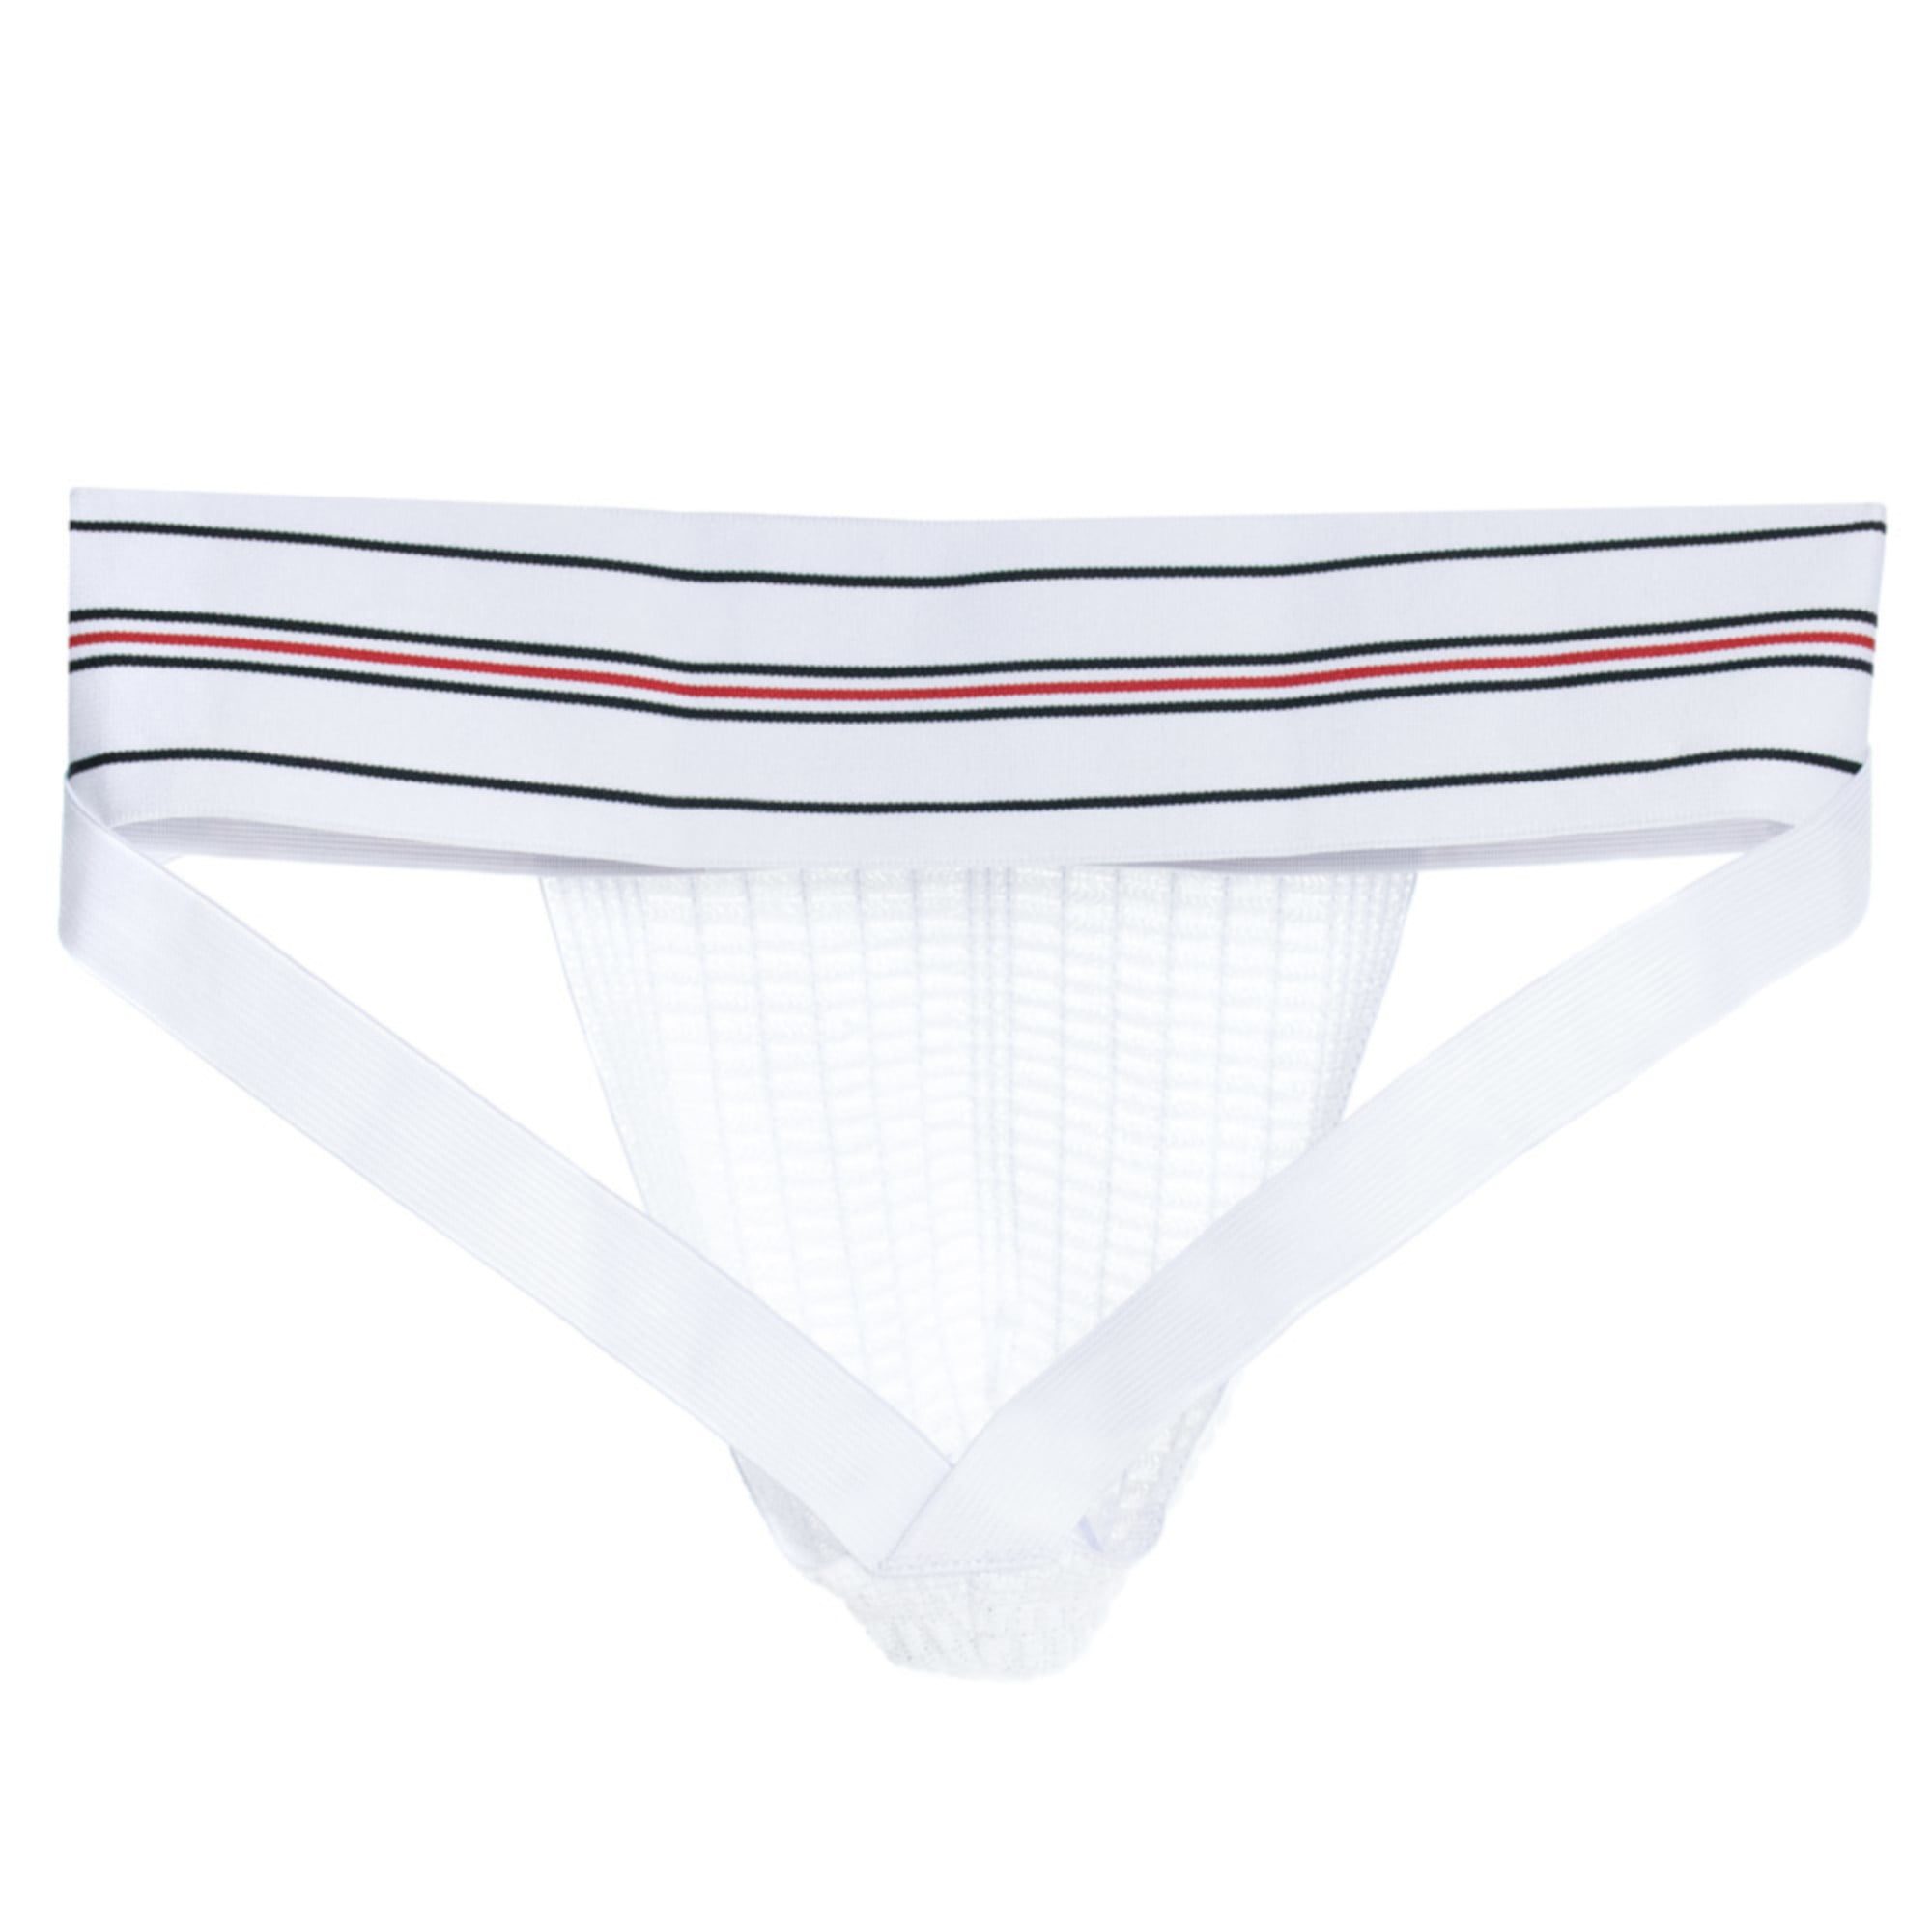 GOL-Fit Next Level Athletic Supporter Multiple Colors Naturally Contoured Waistband for Comfort 